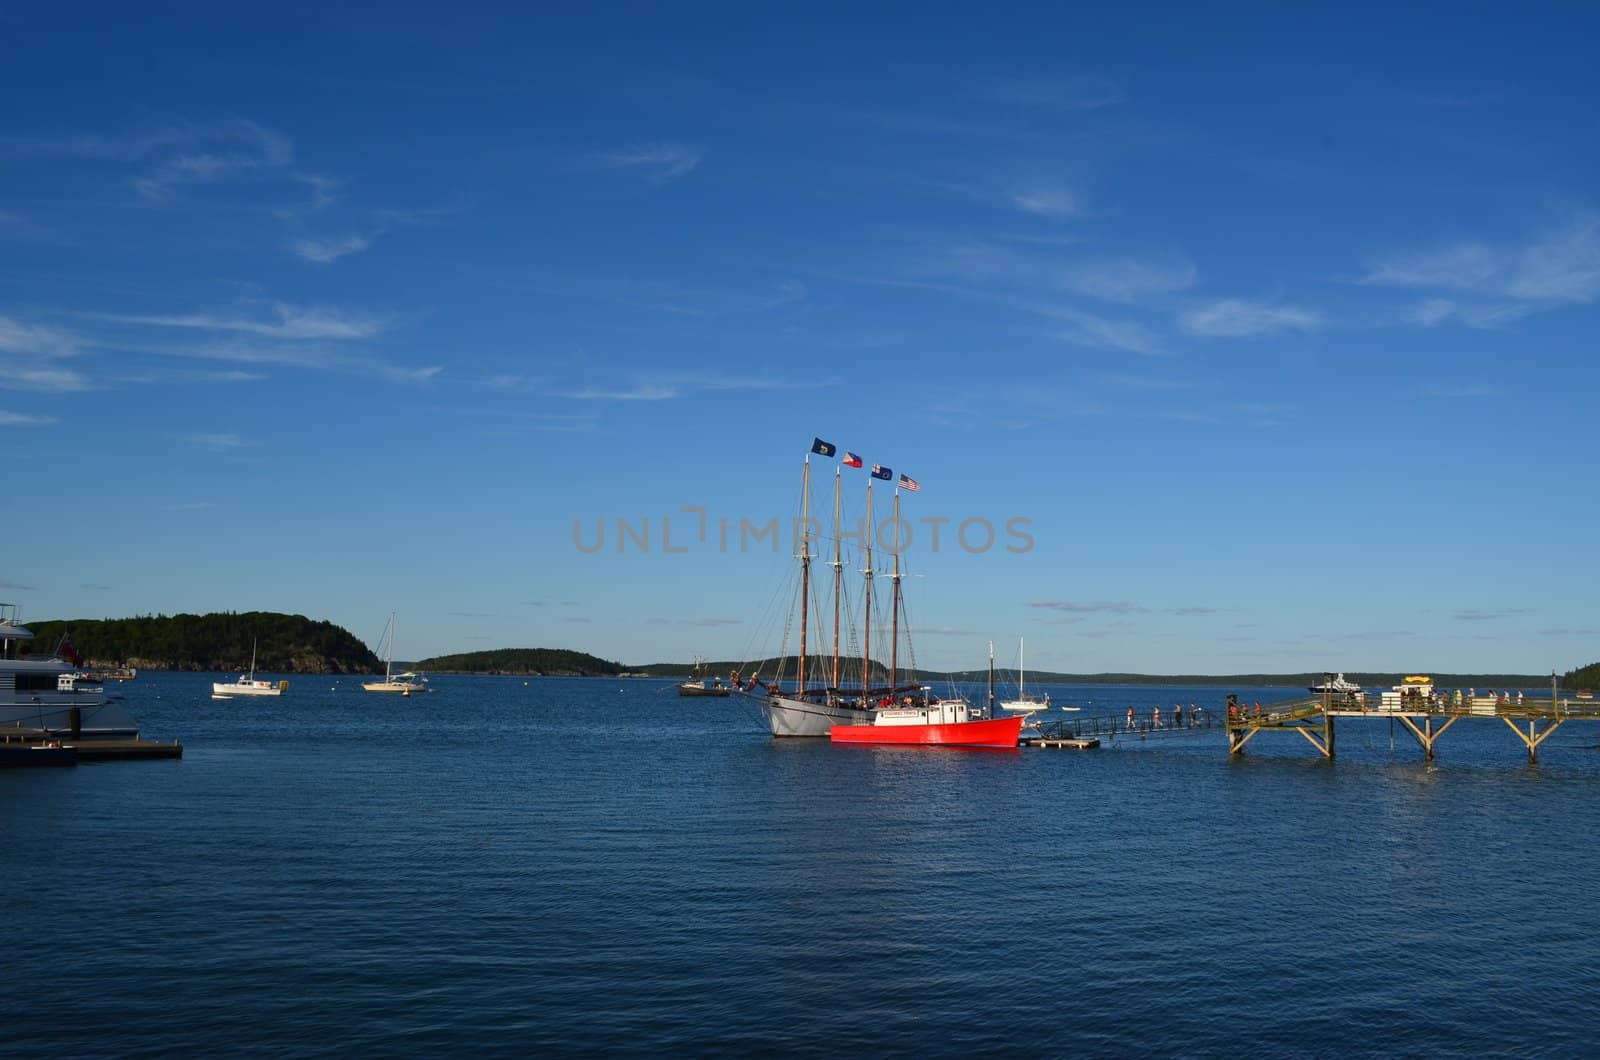 A big four mast ship docked at Bar Harbor in Maine